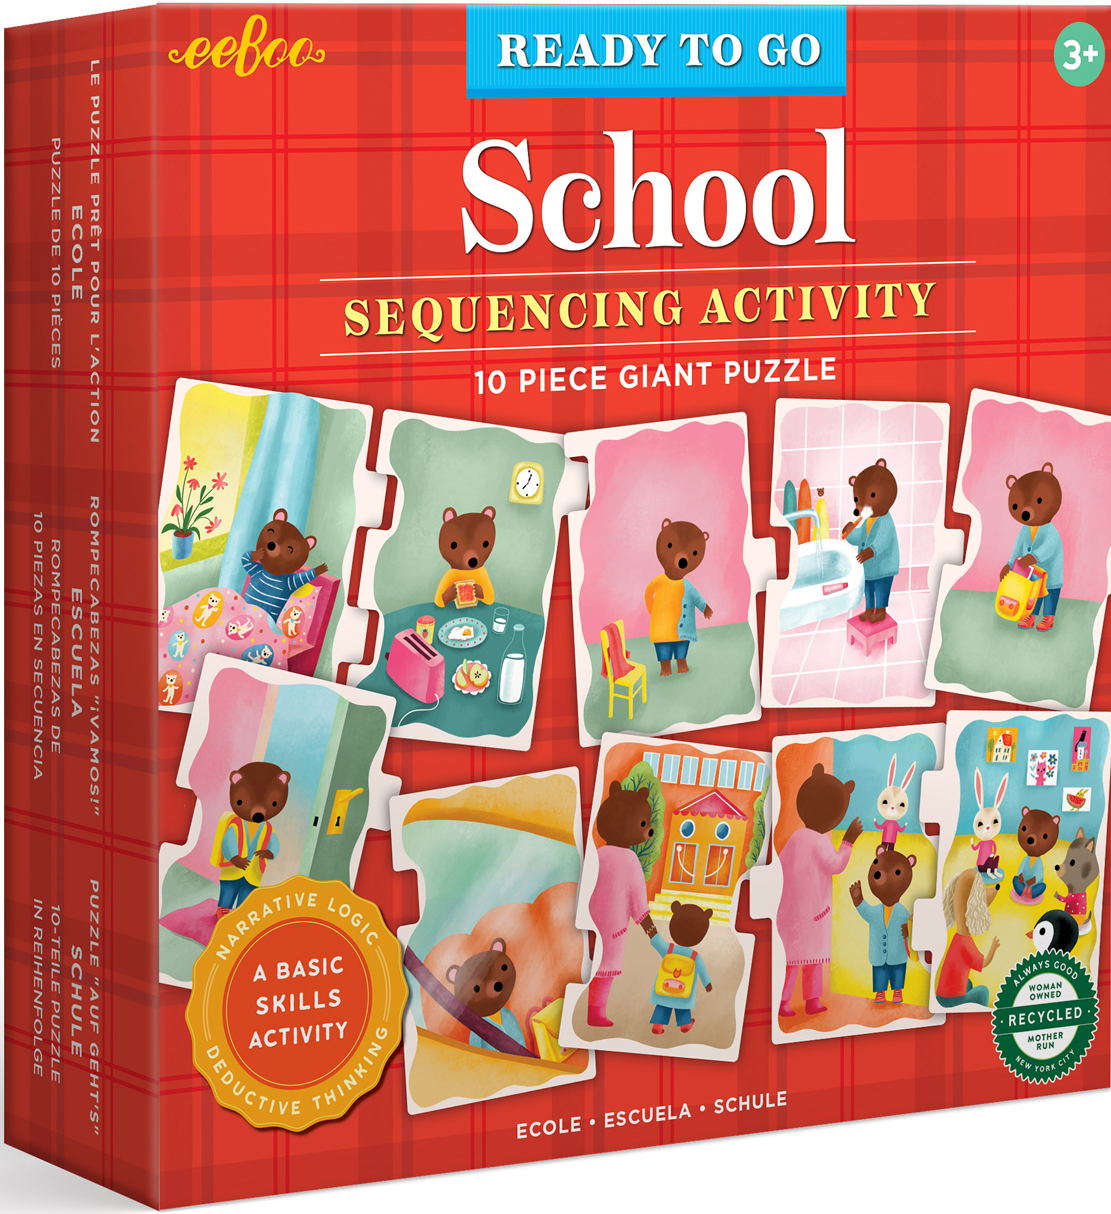 Ready to Go Puzzle - School Educational Jigsaw Puzzle